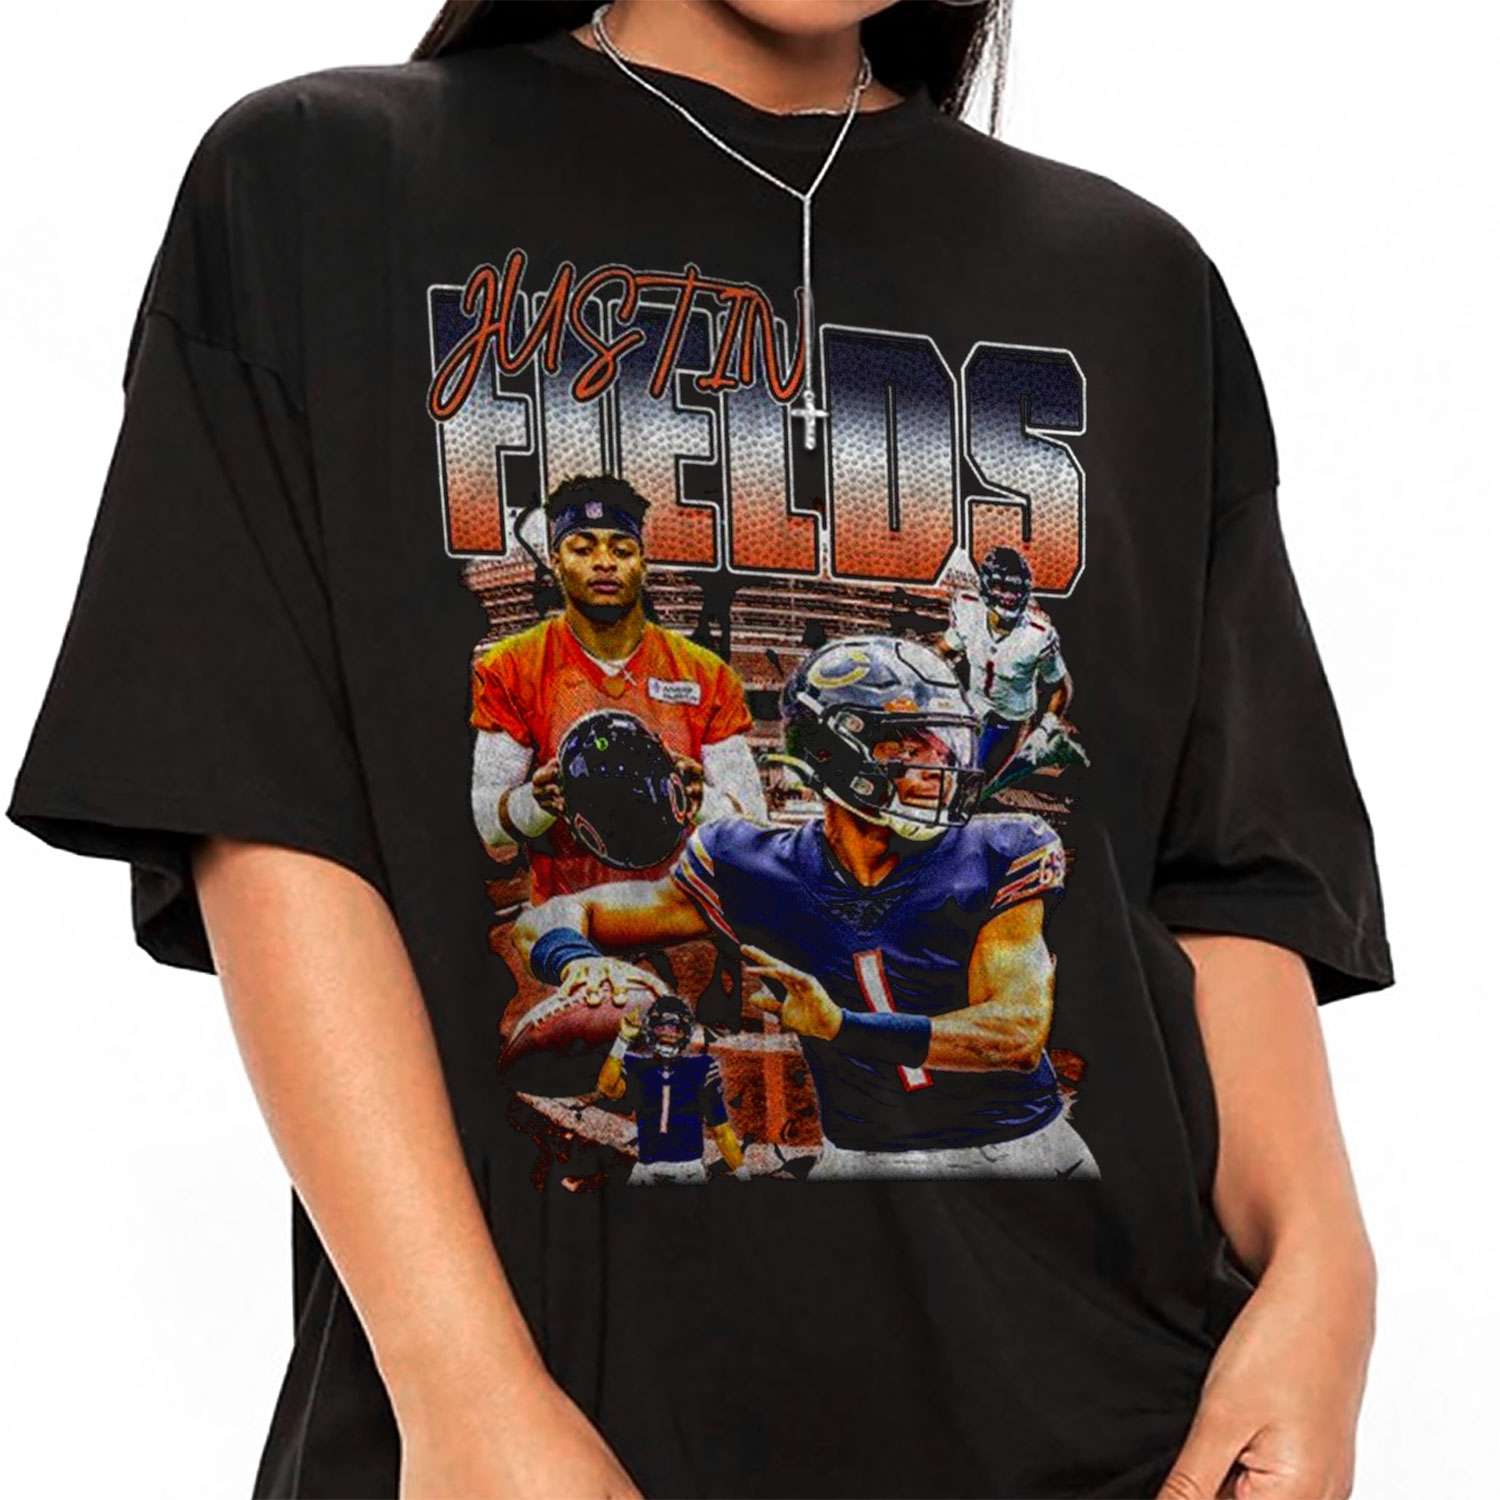 Justin Fields Vintage Retro Style Chicago Bears T-shirt